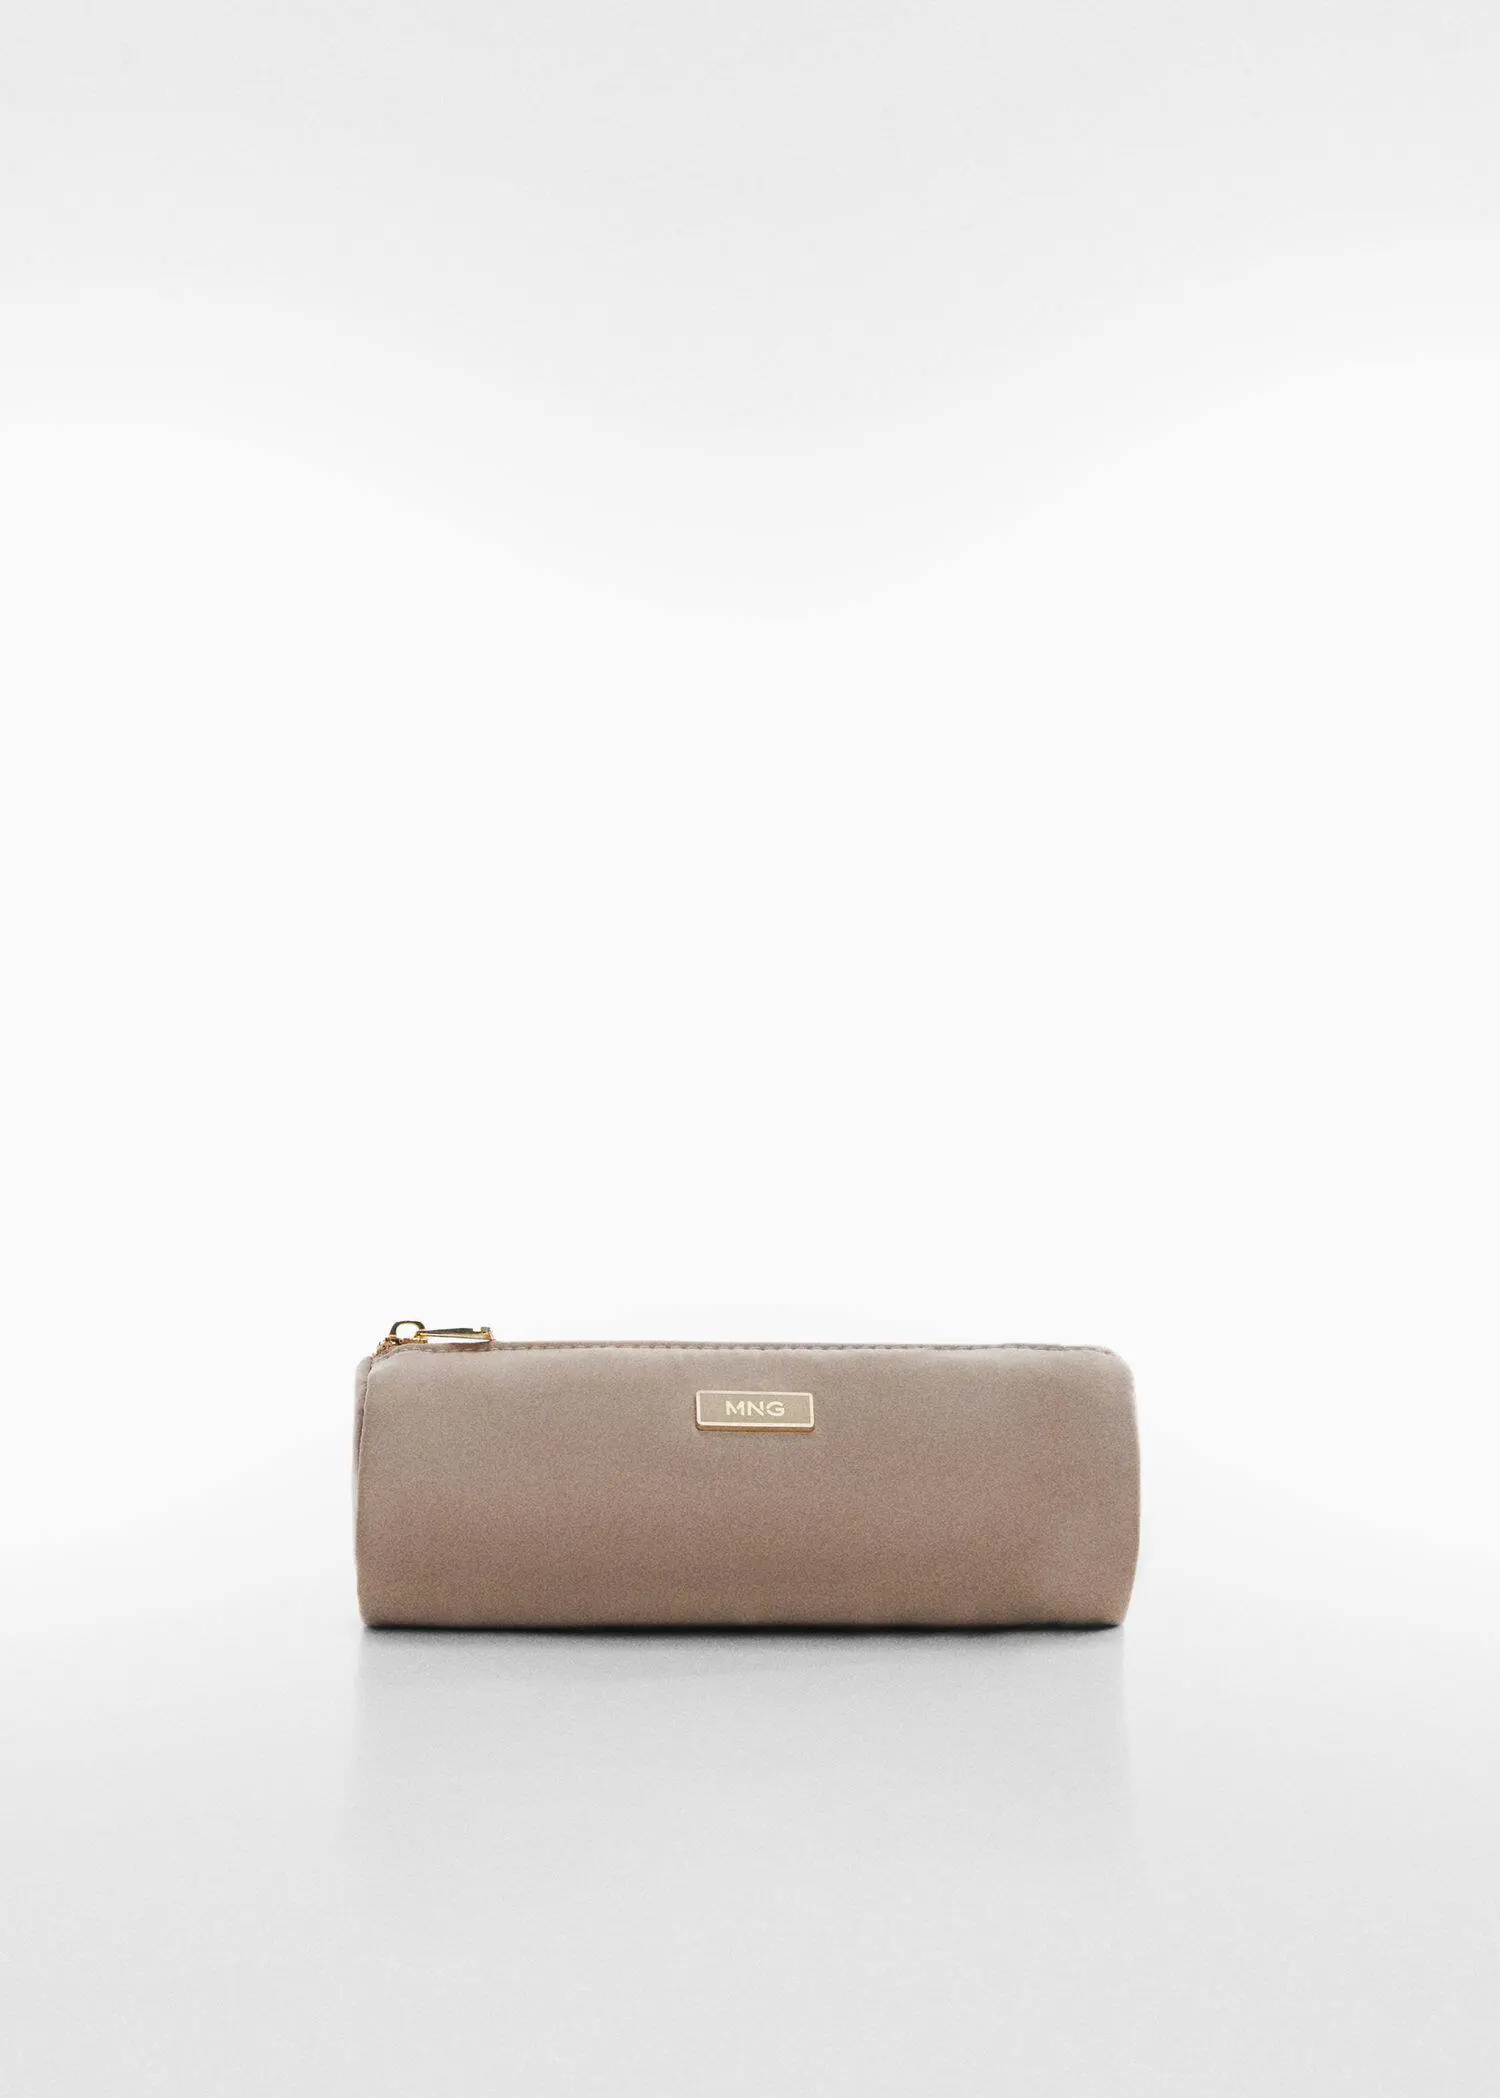 Mango Nylon case. a beige purse sitting on top of a white table. 